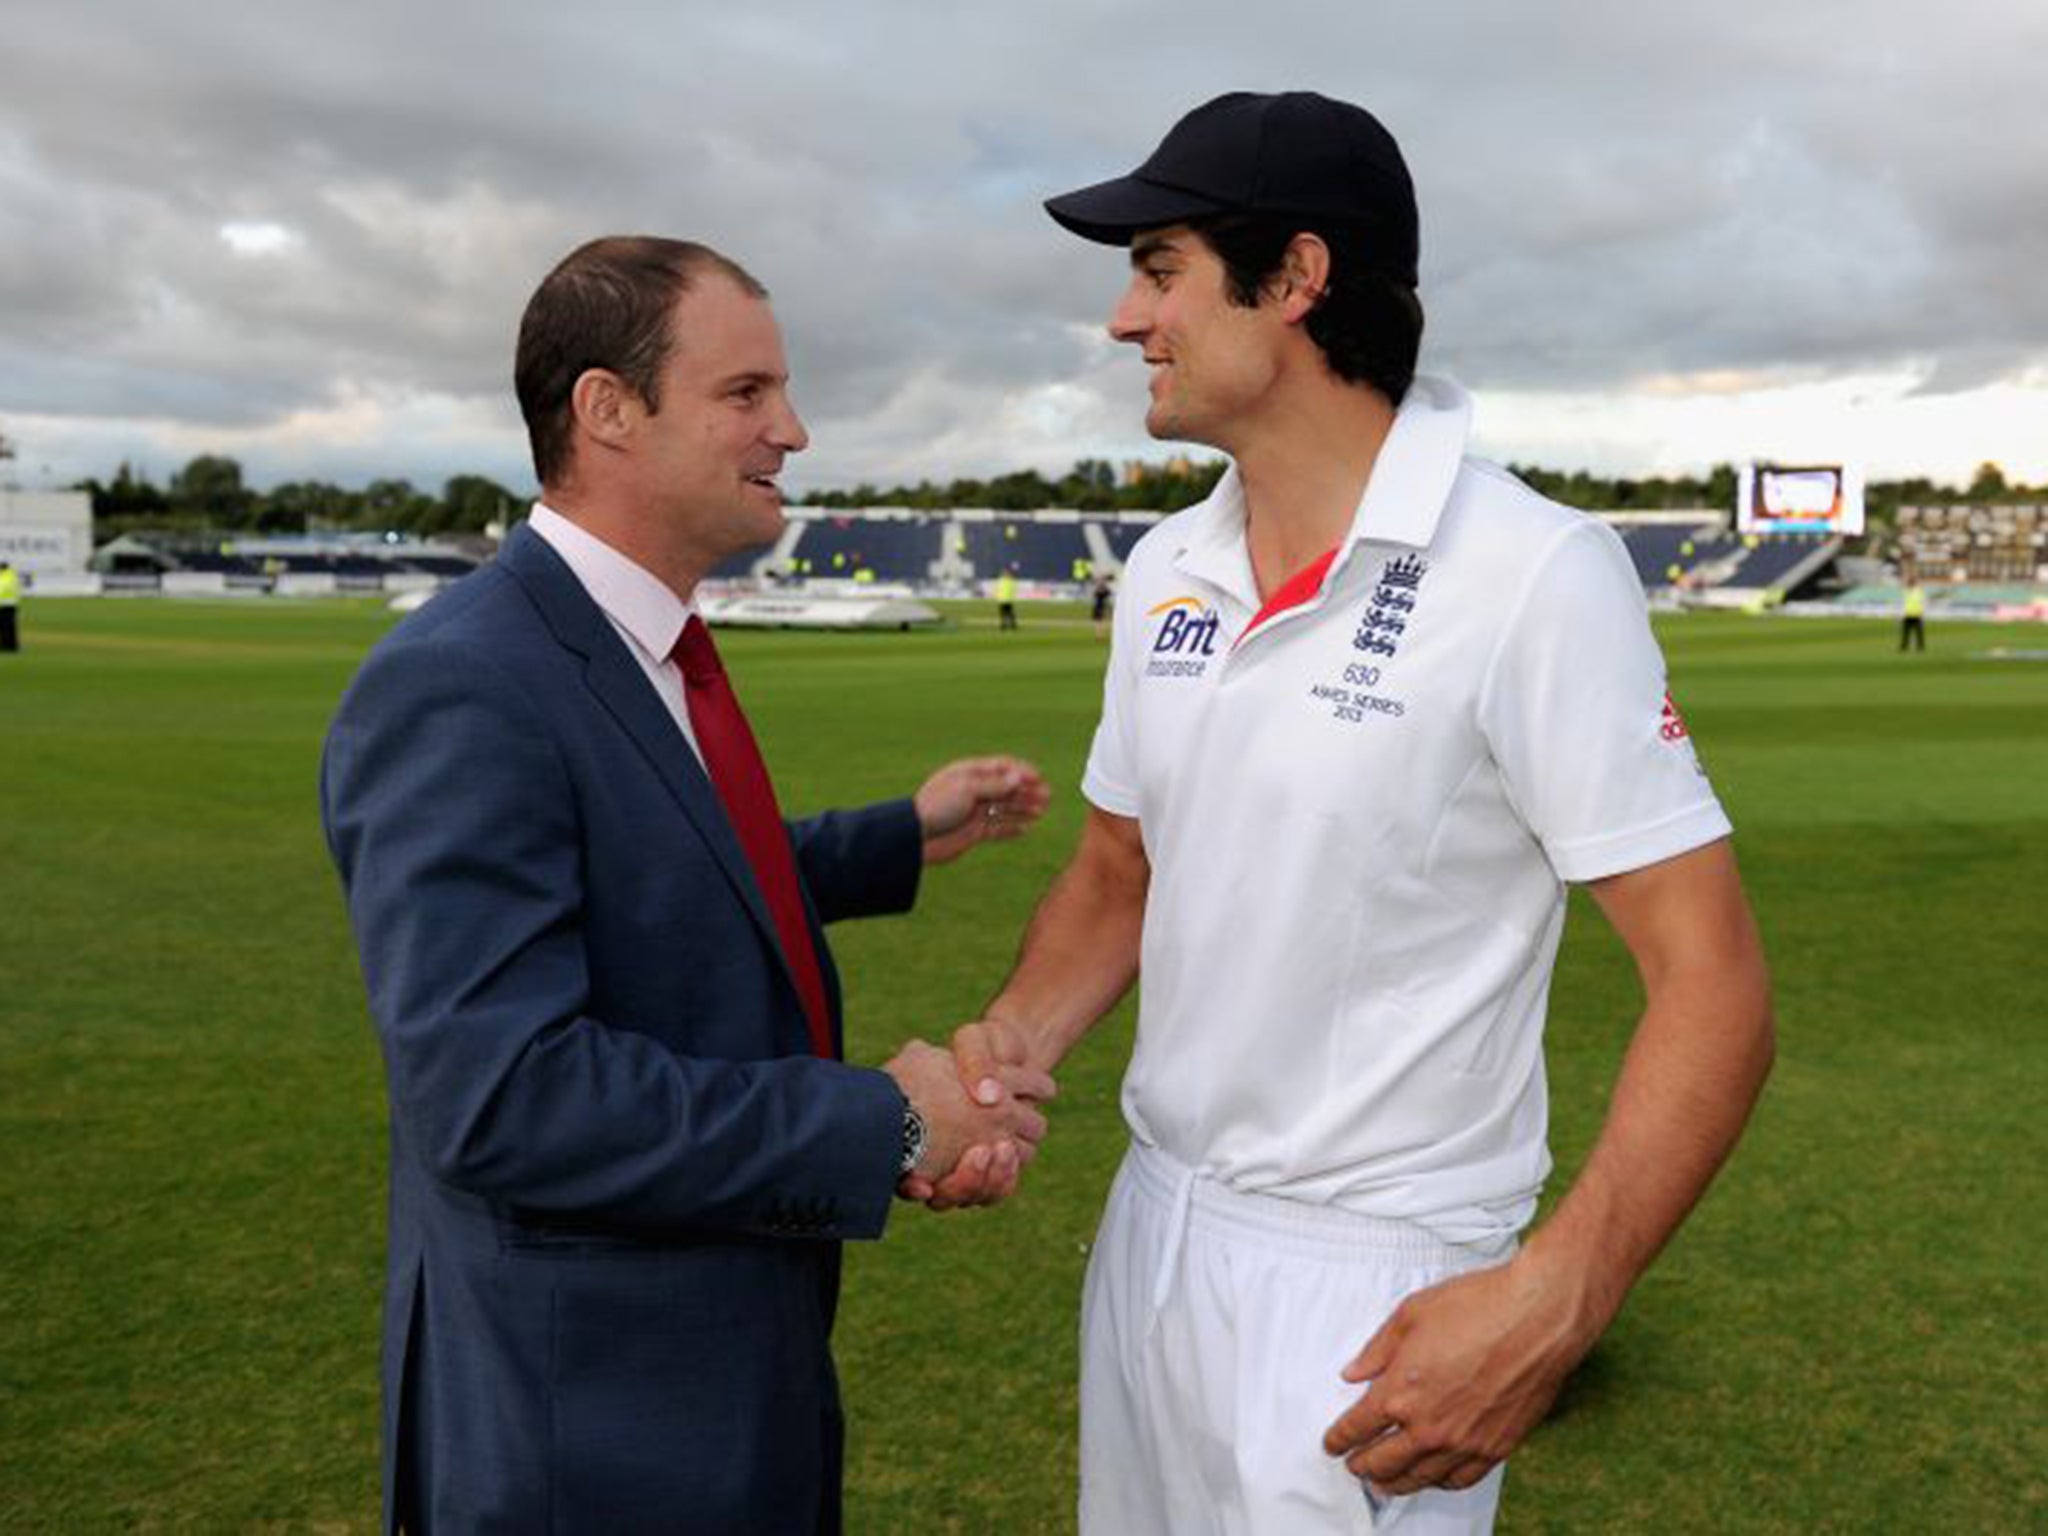 Andrew Strauss congratulates Alastair Cook after England beat Australia in Durham during the 2013 Ashes (Getty)